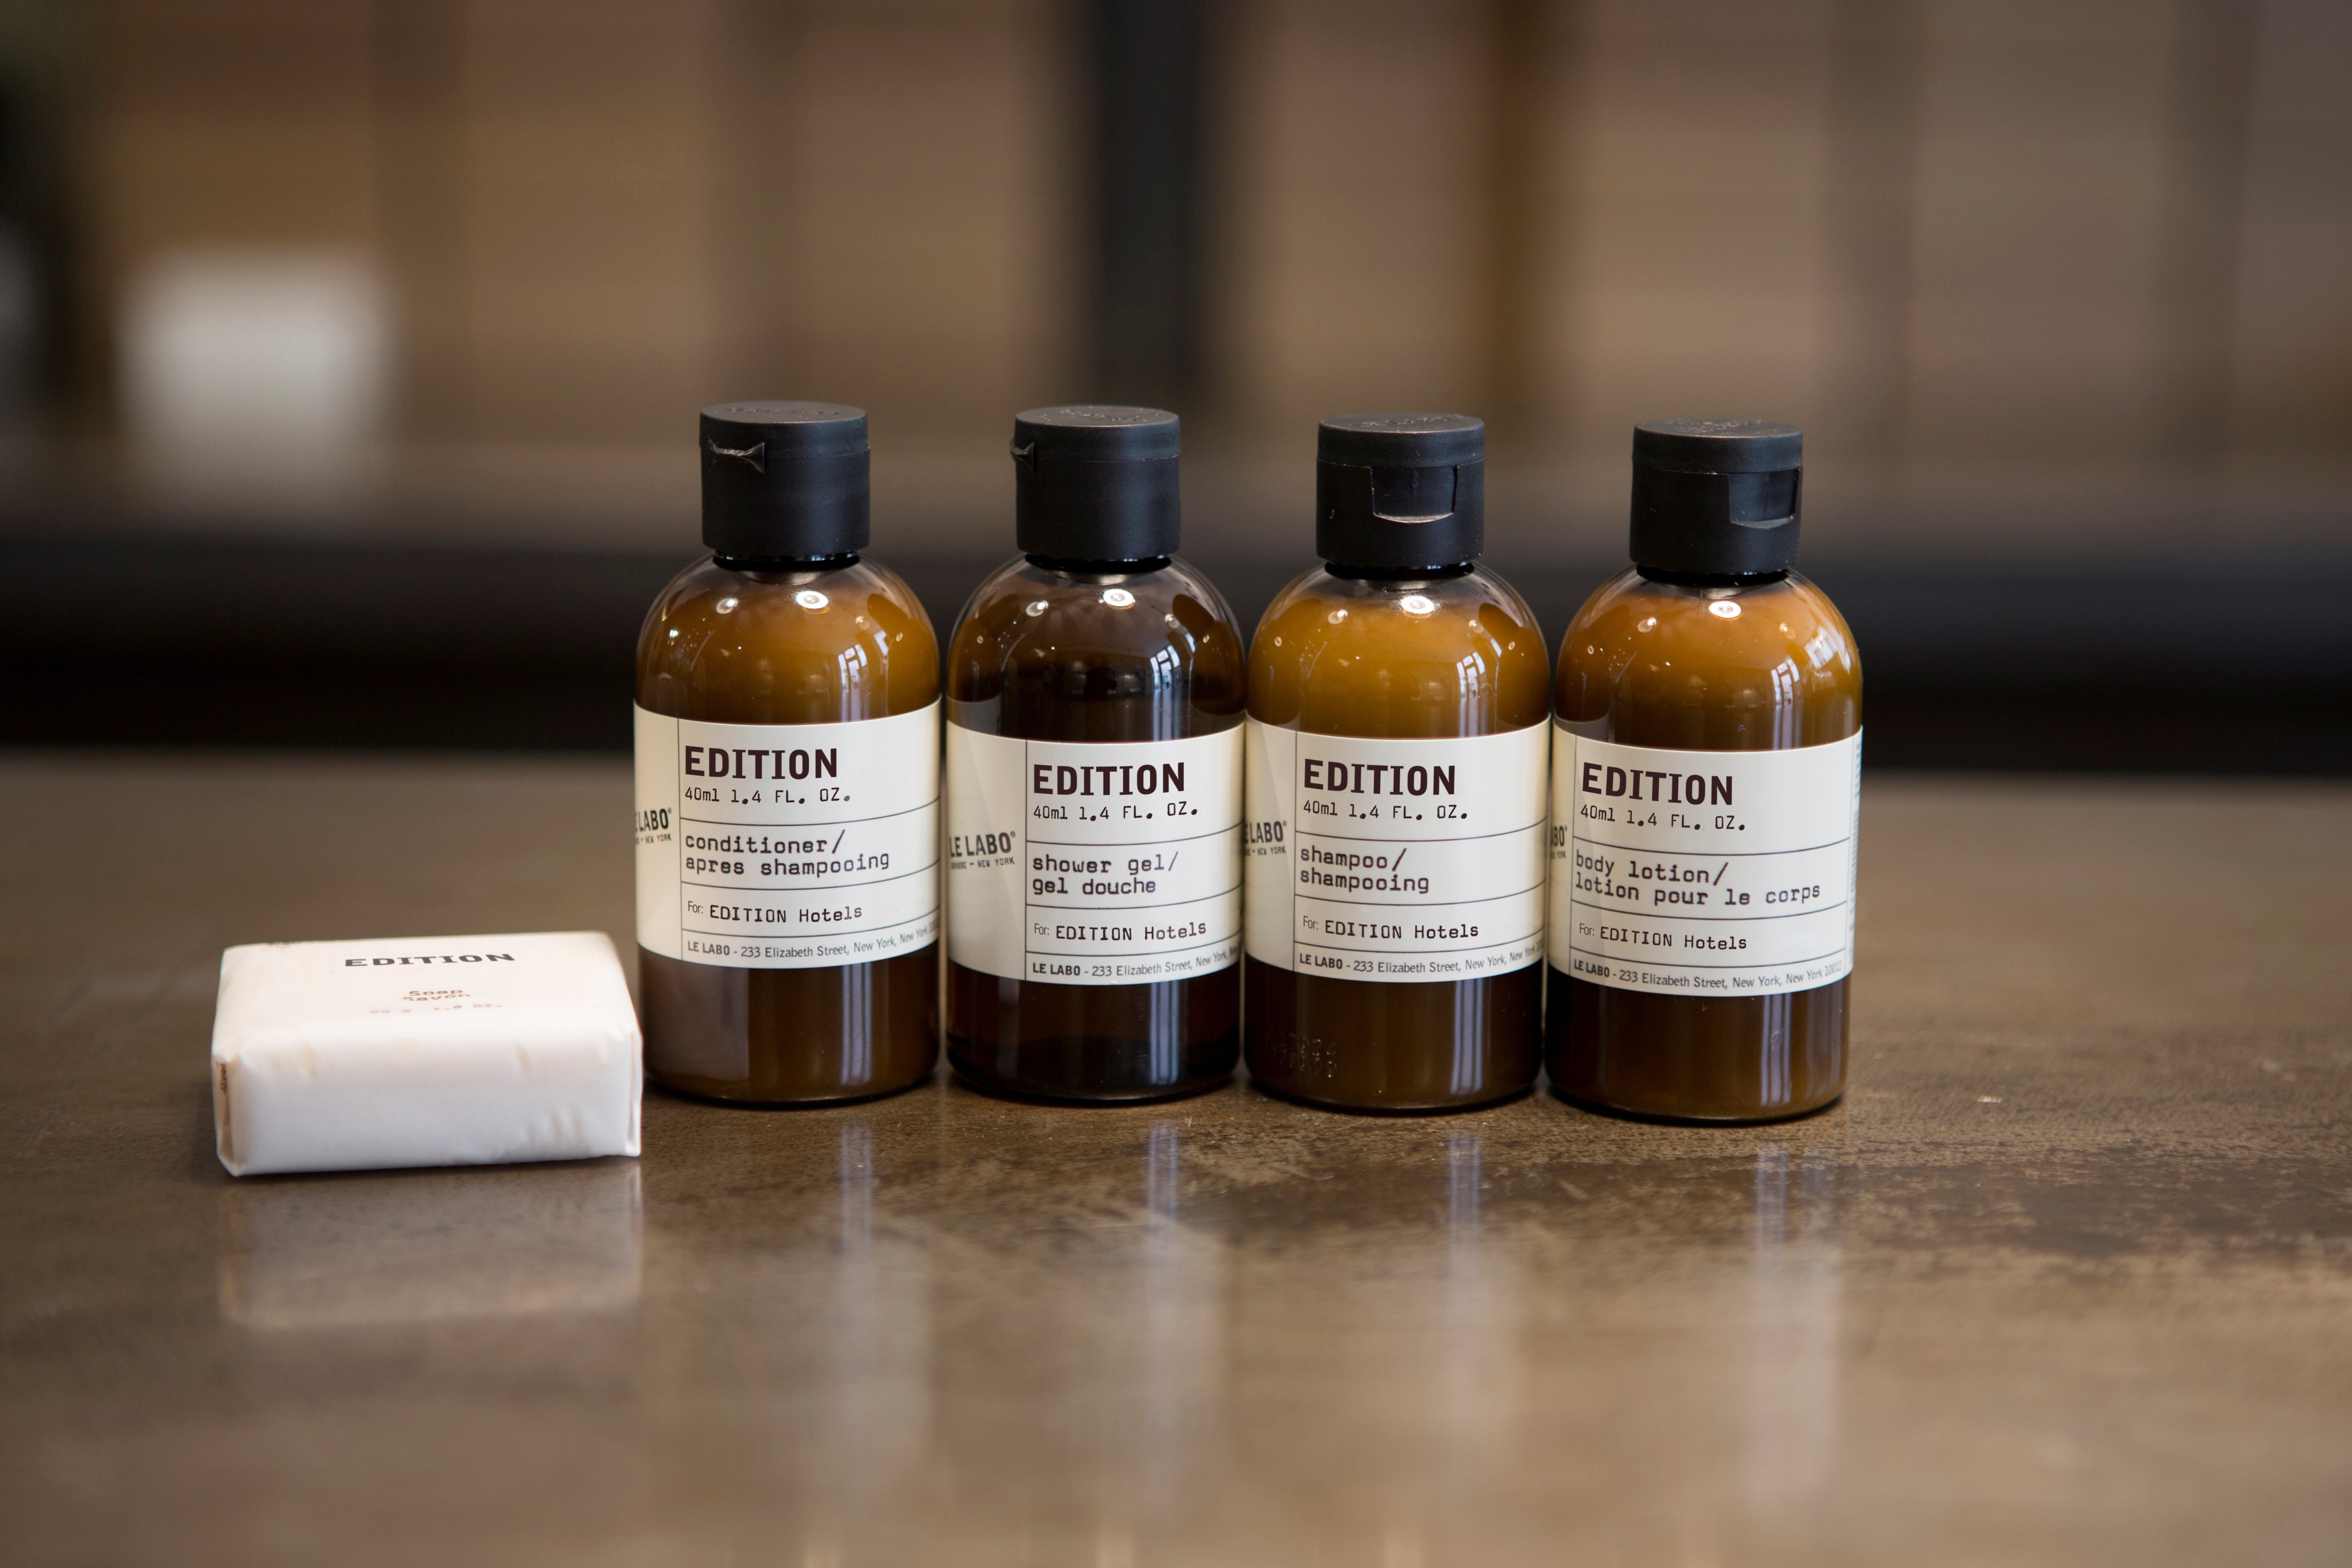 Le Labo products are provided in Edition hotels worldwide.